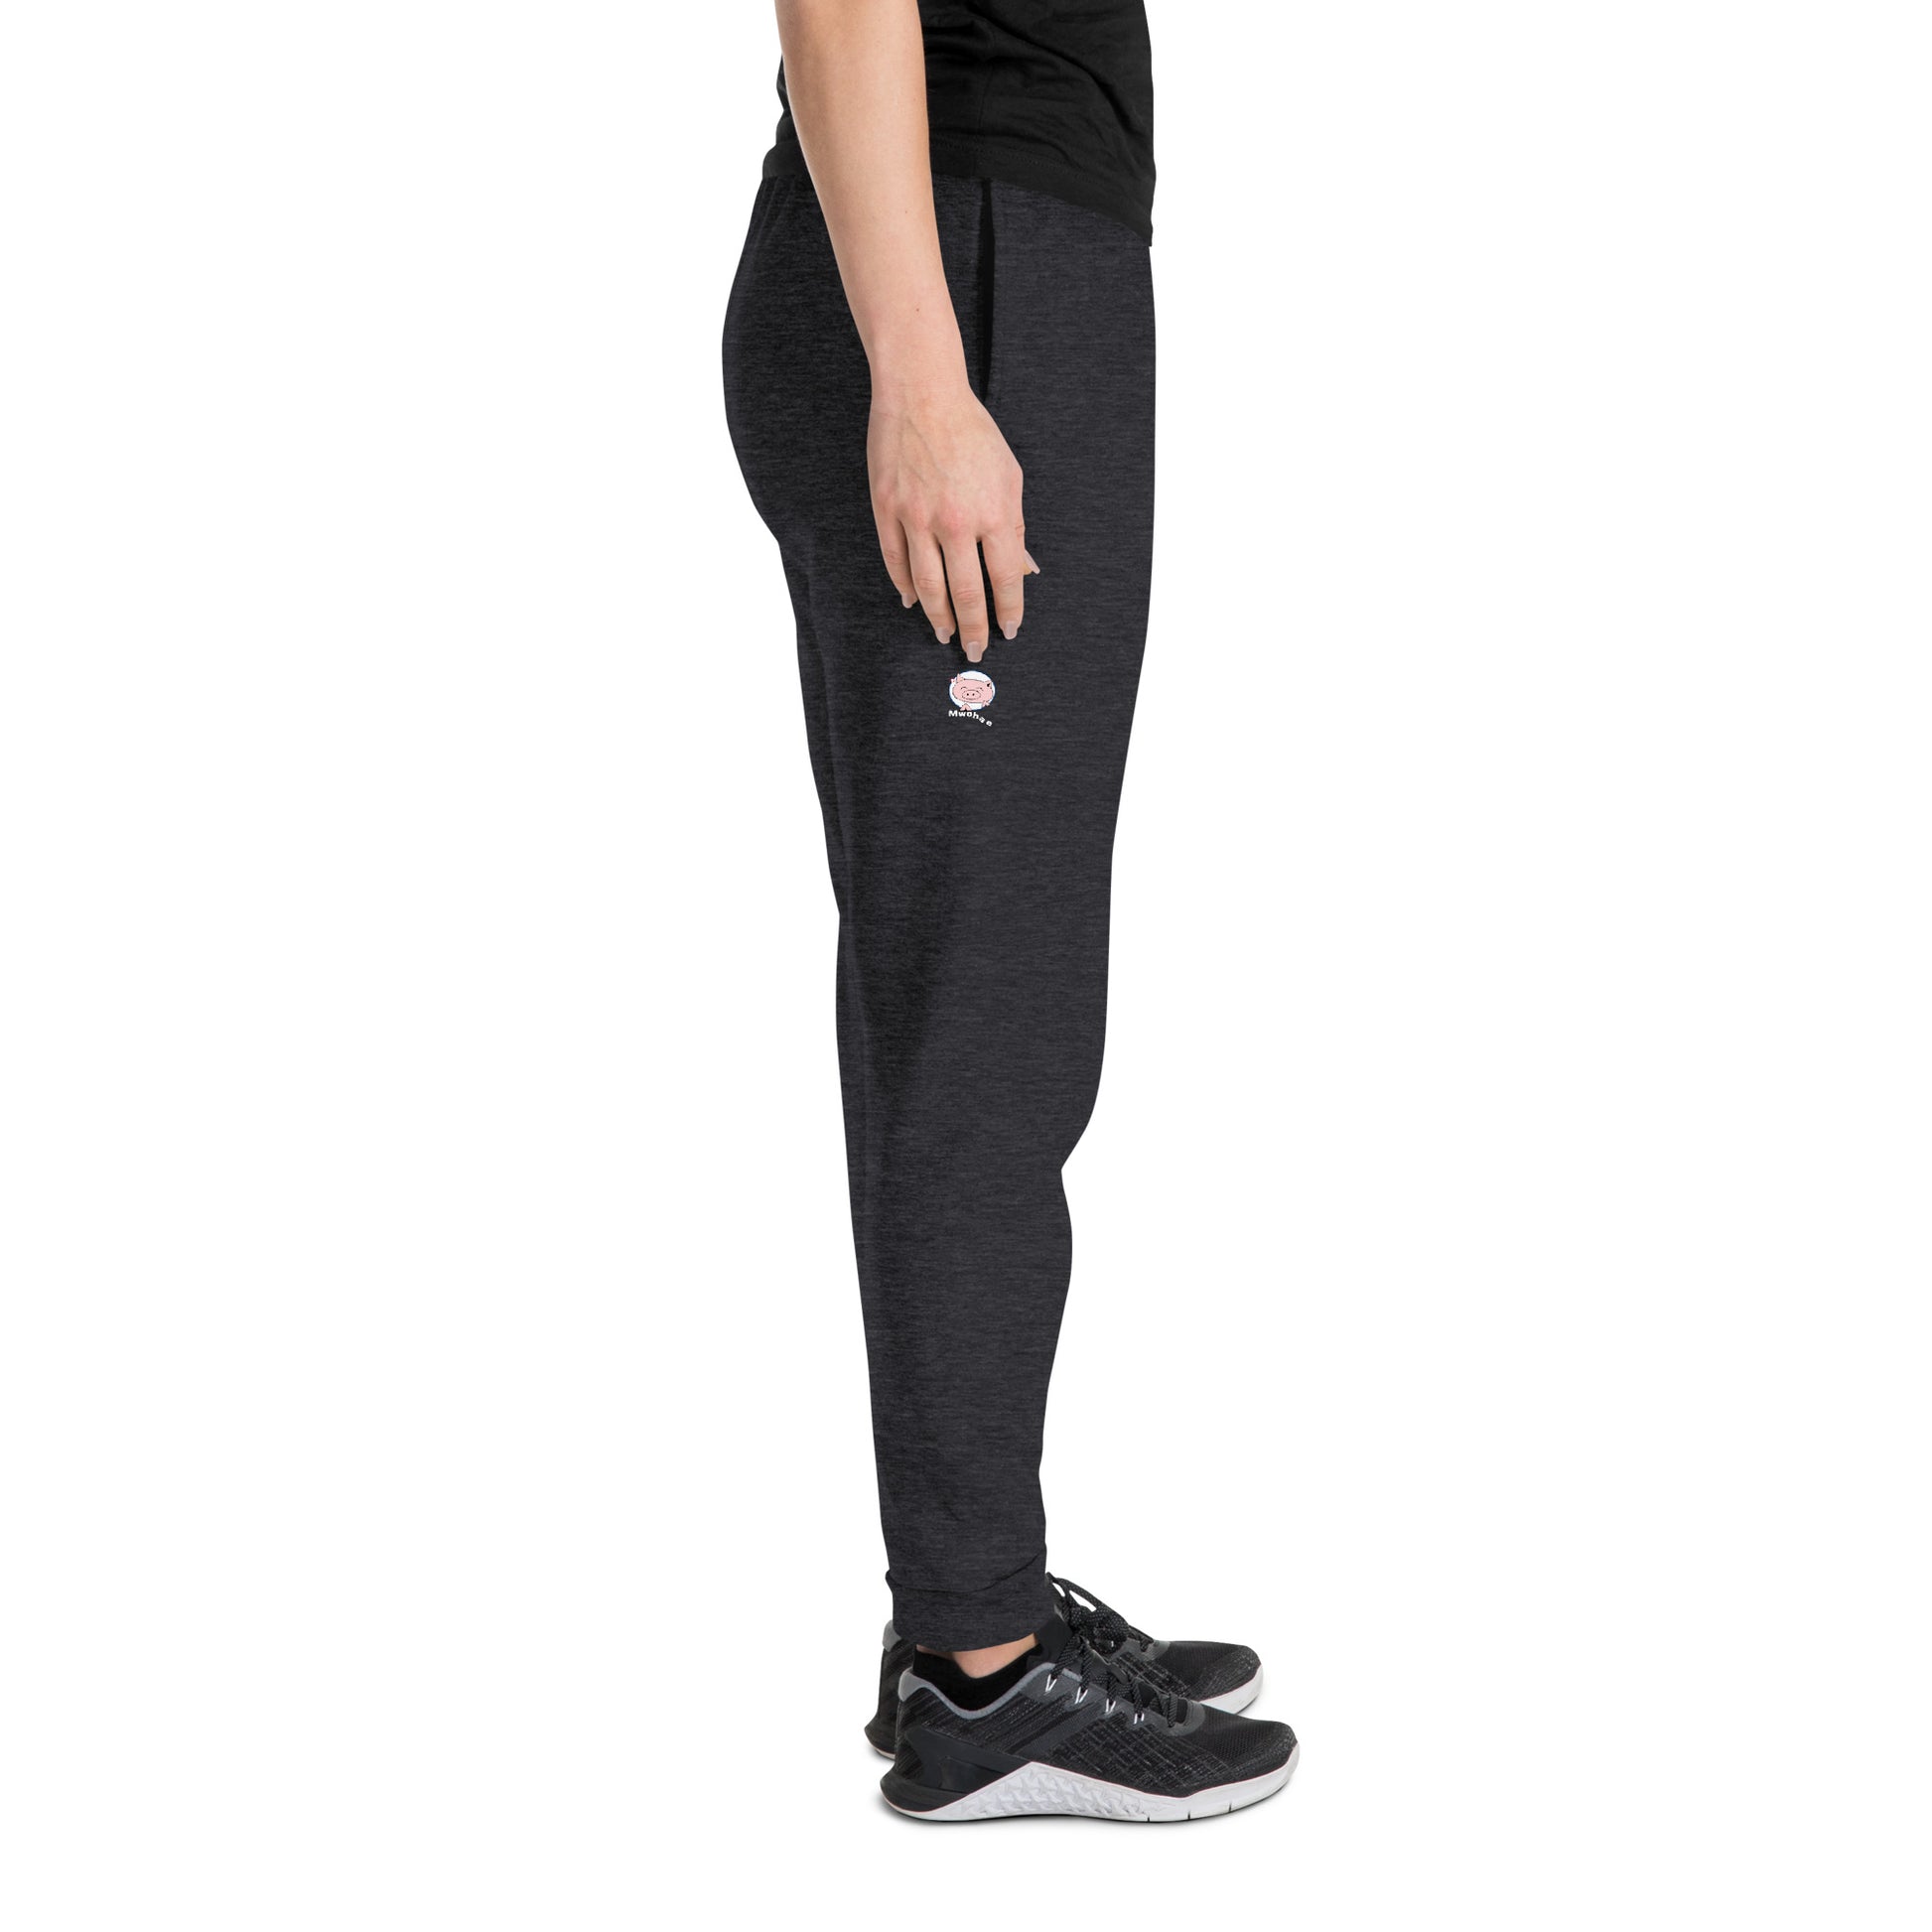 Black heather pair of joggers with small Mwohae logo on the right leg